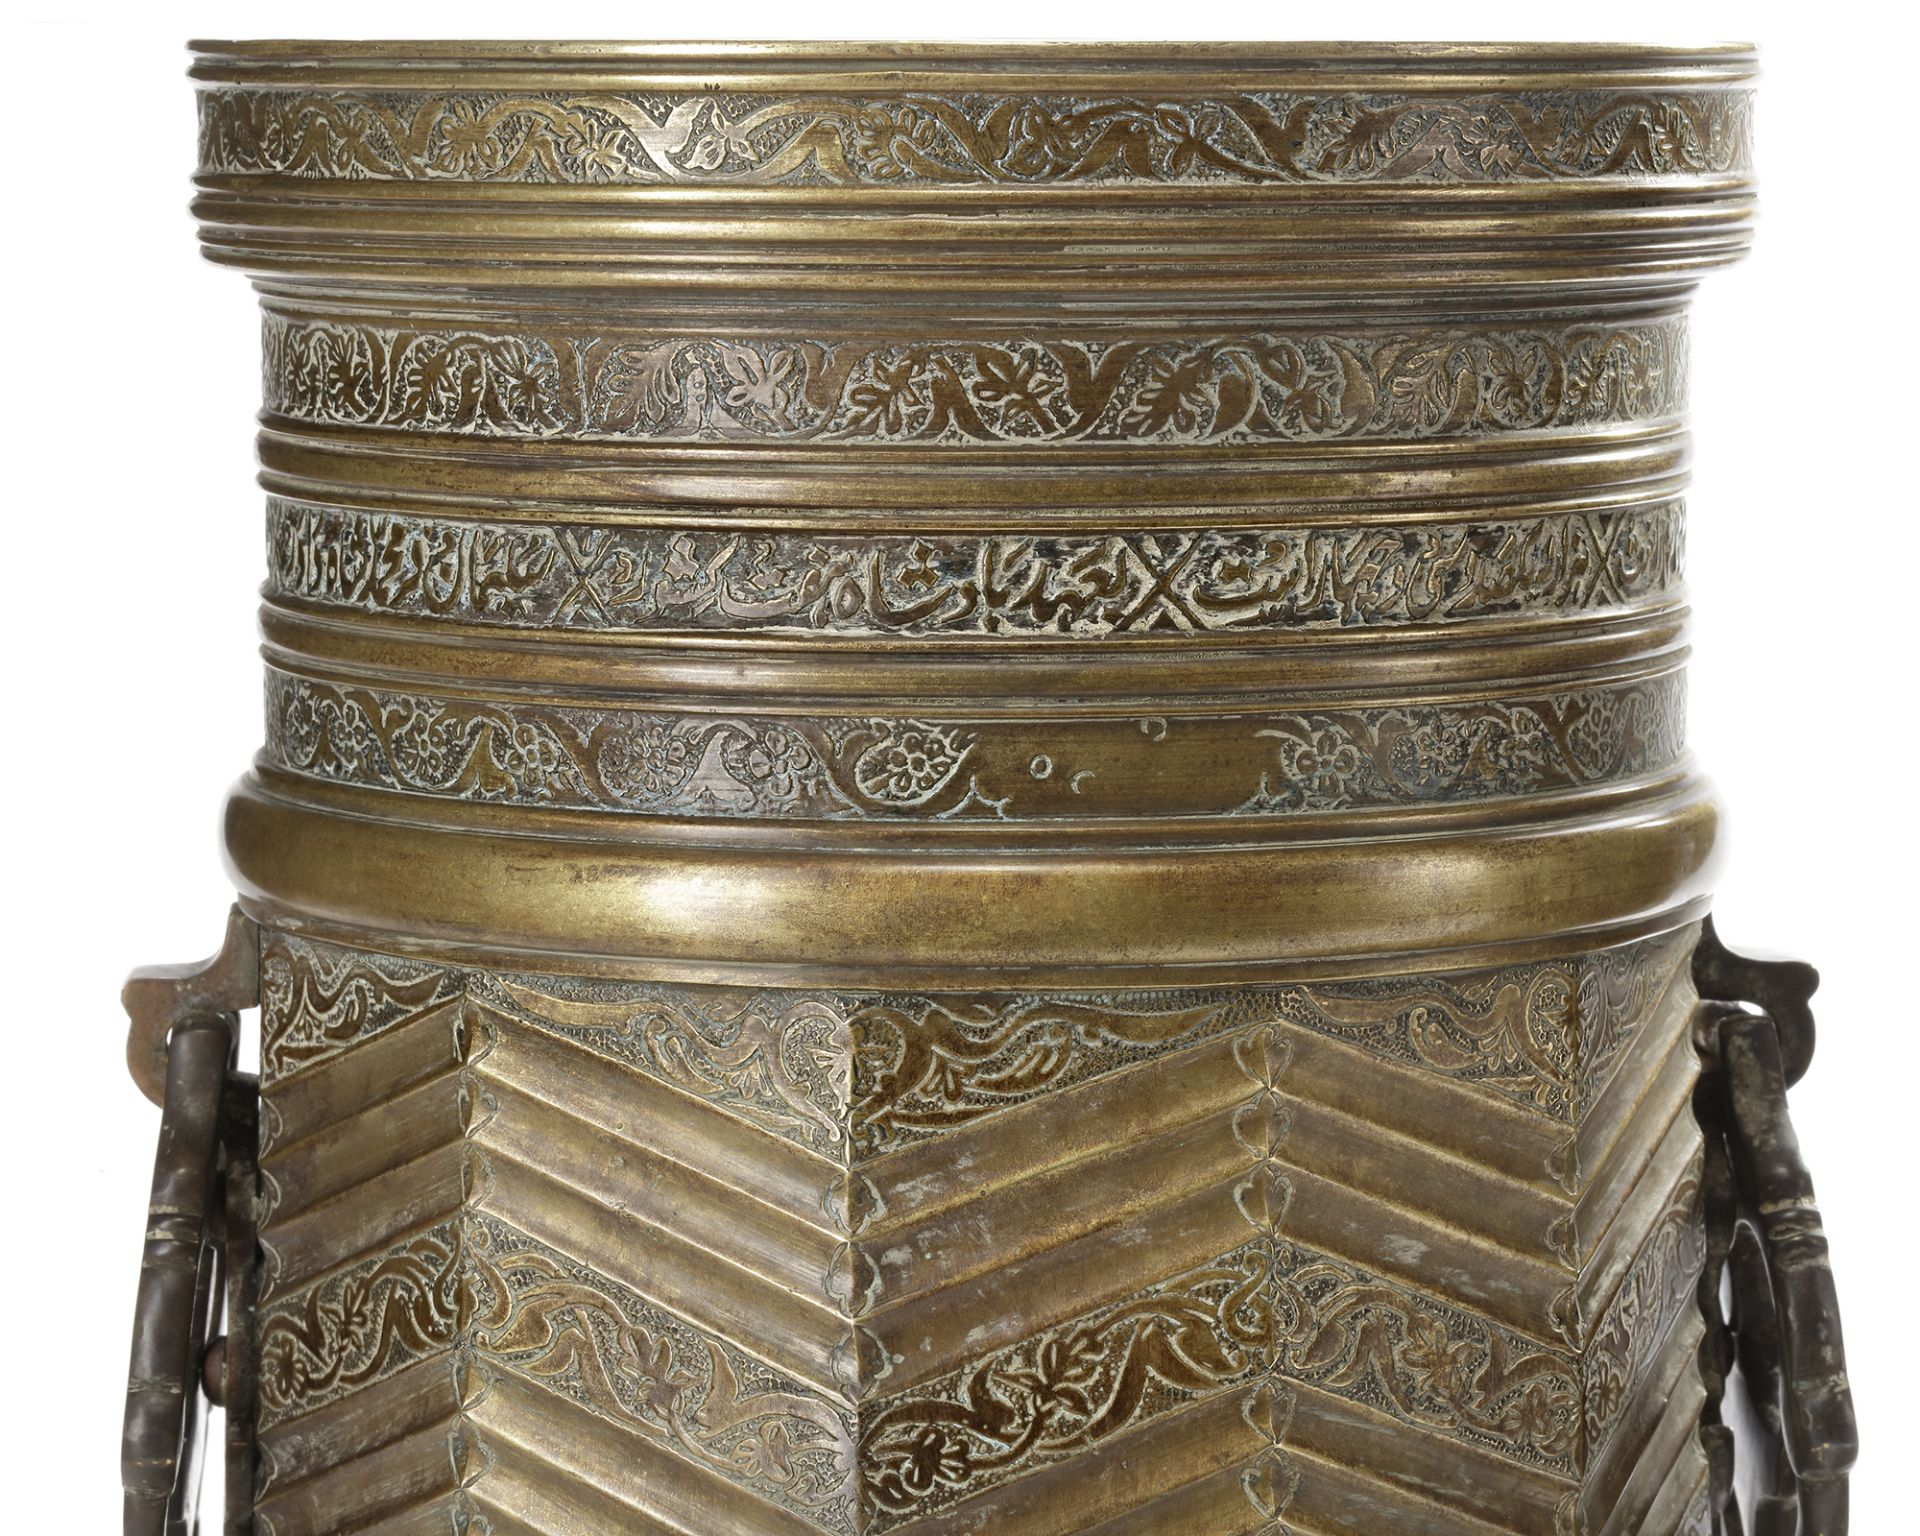 A PAIR LARGE OF SAFAVID STYLE ENGRAVED BRASS TORCH STANDS, PERSIA, 18TH -19TH CENTURY - Image 5 of 6